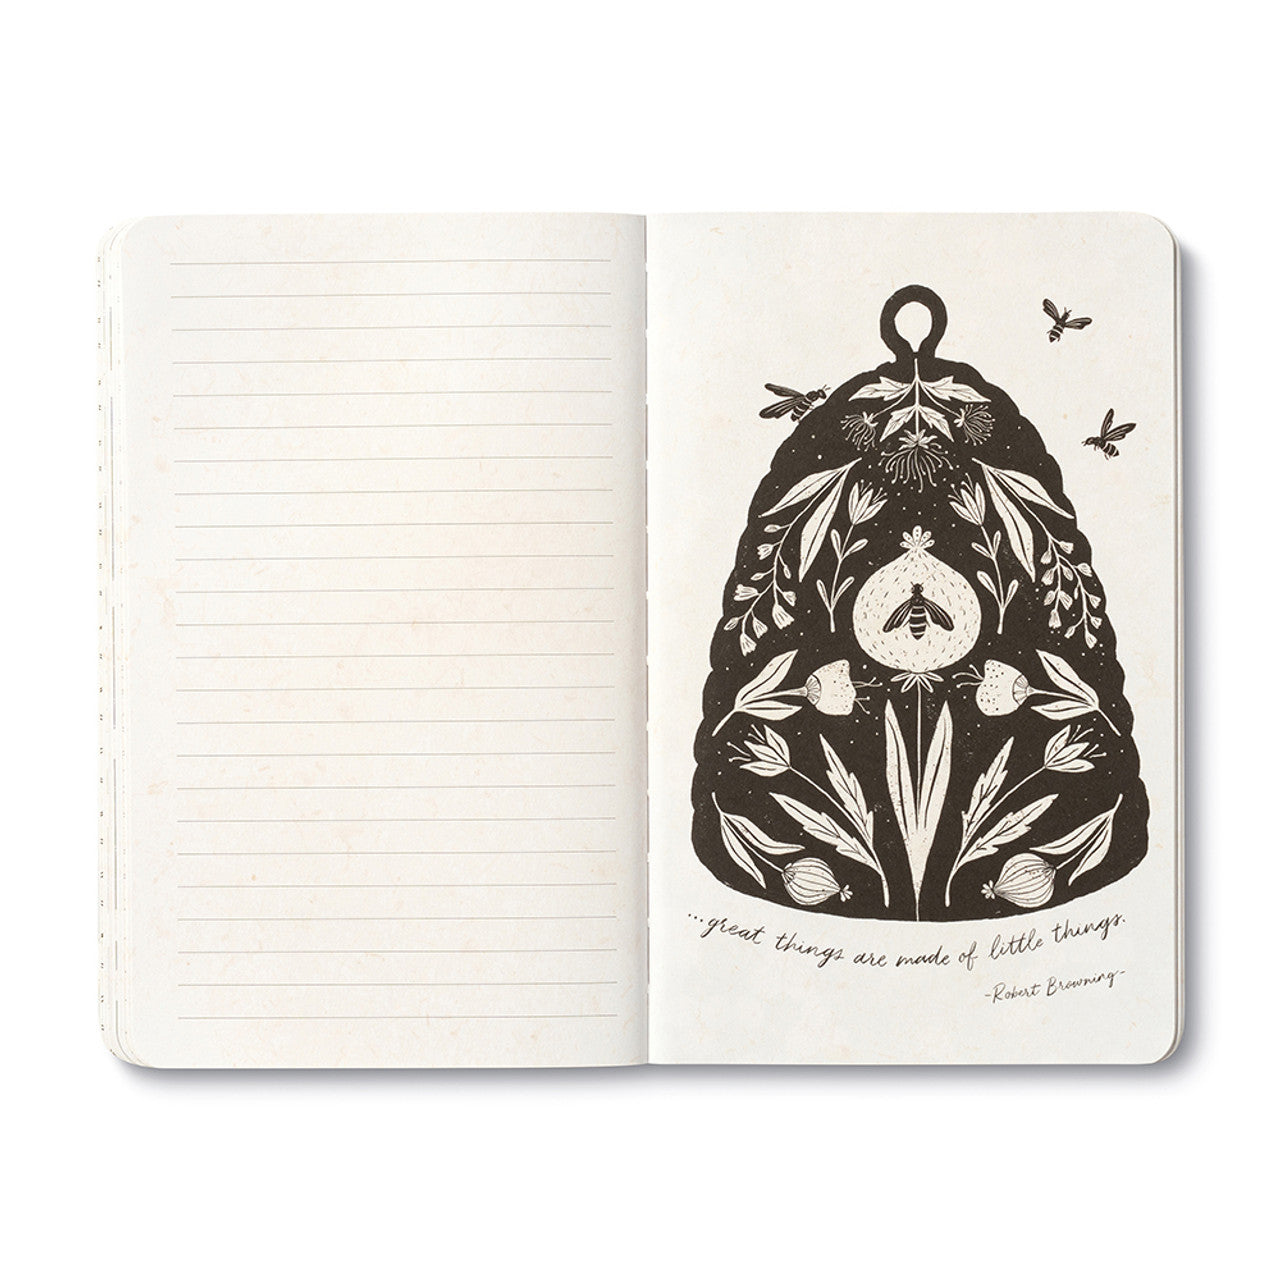 The Heart That Gives Gathers - Write Now Journal